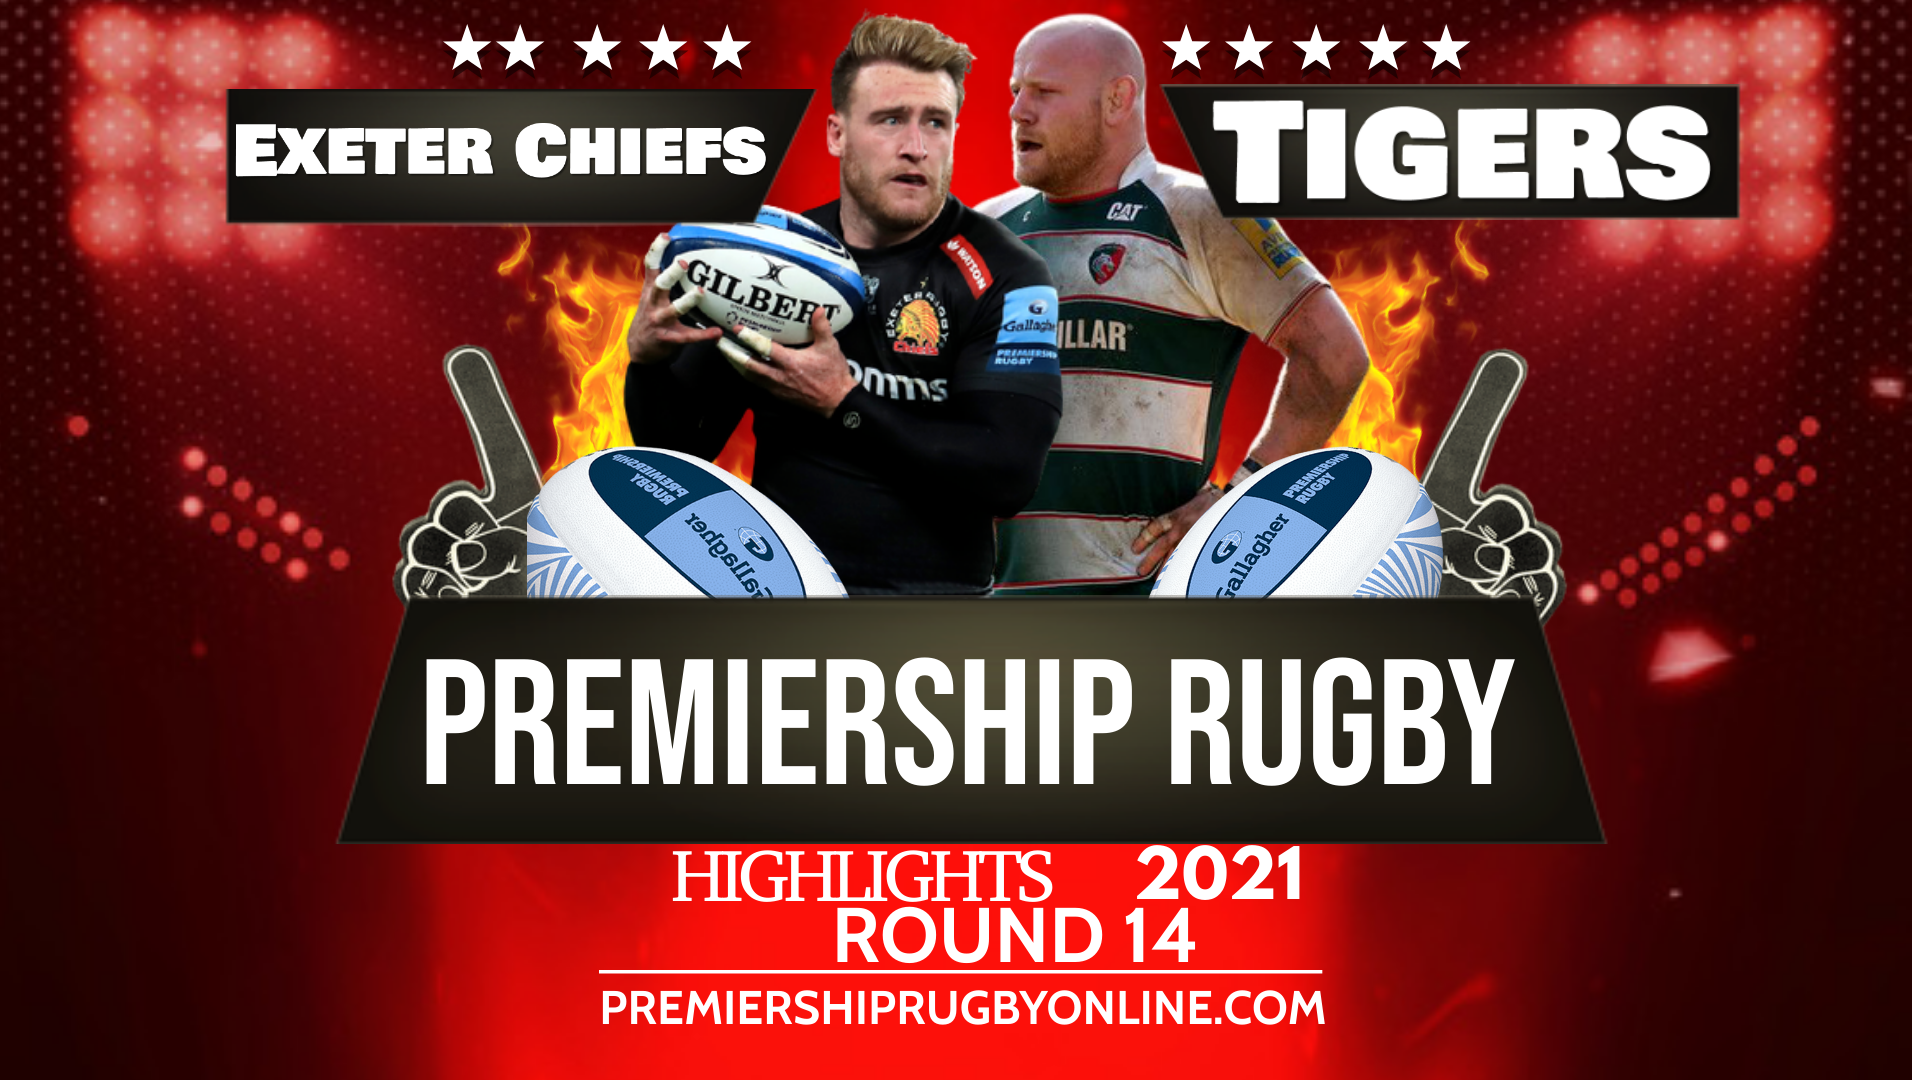 Exeter Chiefs Vs Leicester Tigers Highlights 2021 RD 14